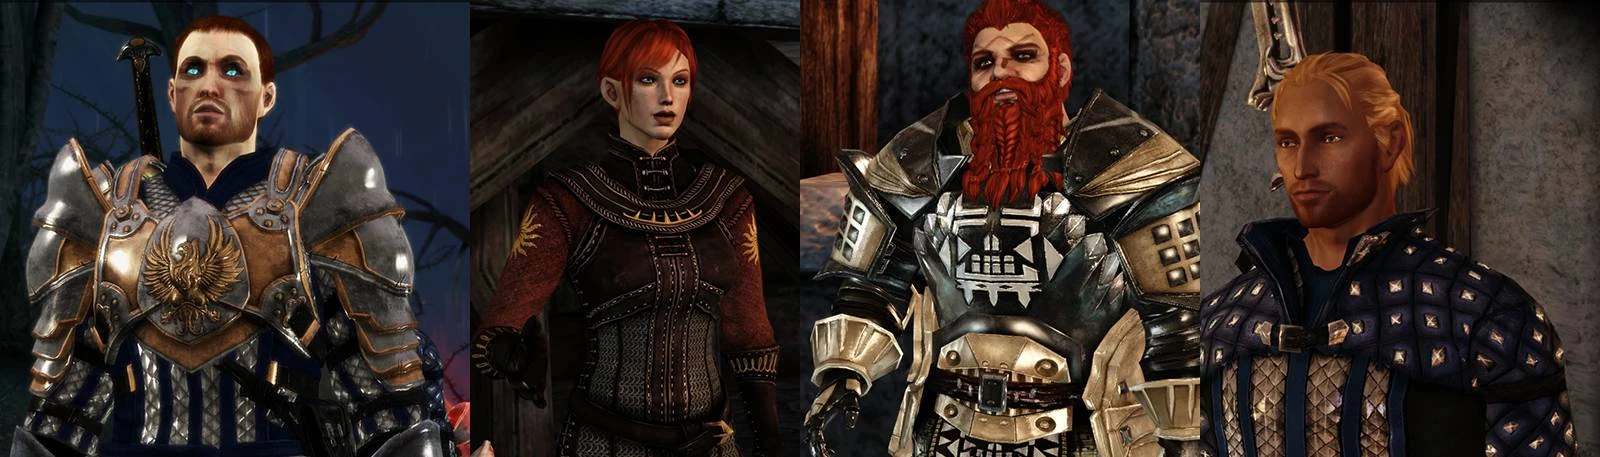 Dragon Age: Inquisition Players Can Customize Companion Gear